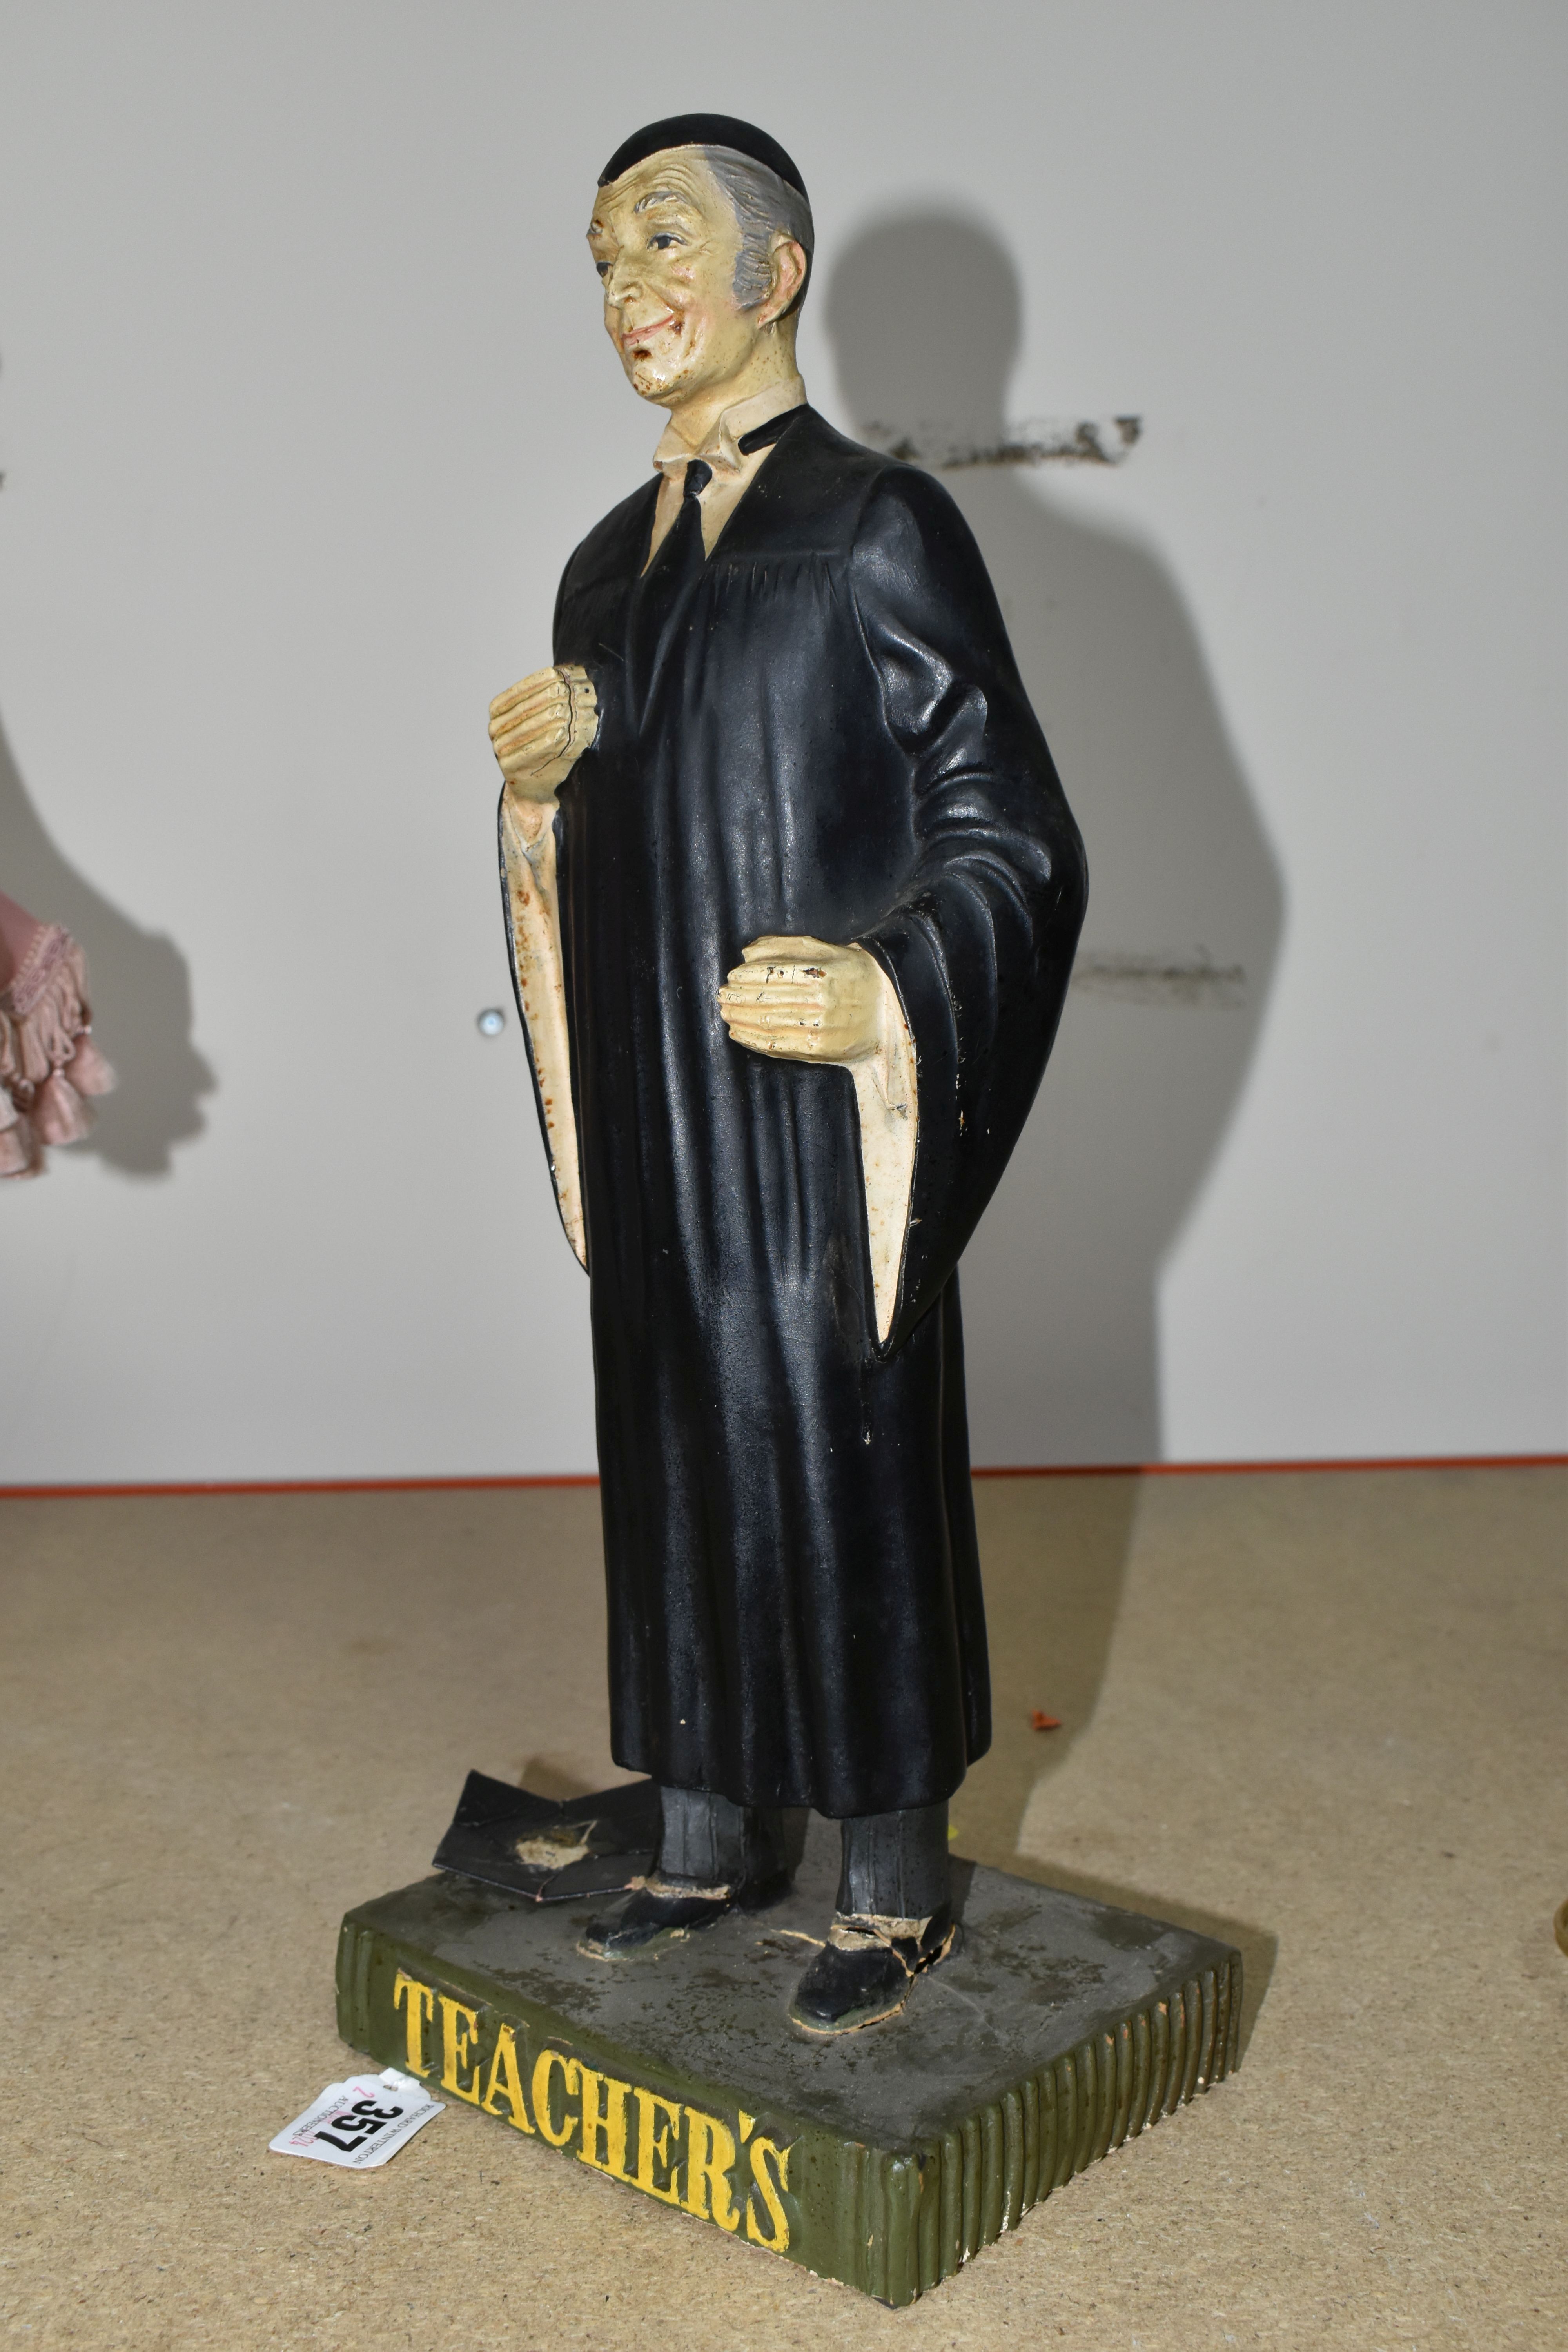 A TEACHER'S SCOTCH WHISKY ADVERTISING FIGURE, the Ruberoid figure in the form of a teacher in cap - Image 8 of 11